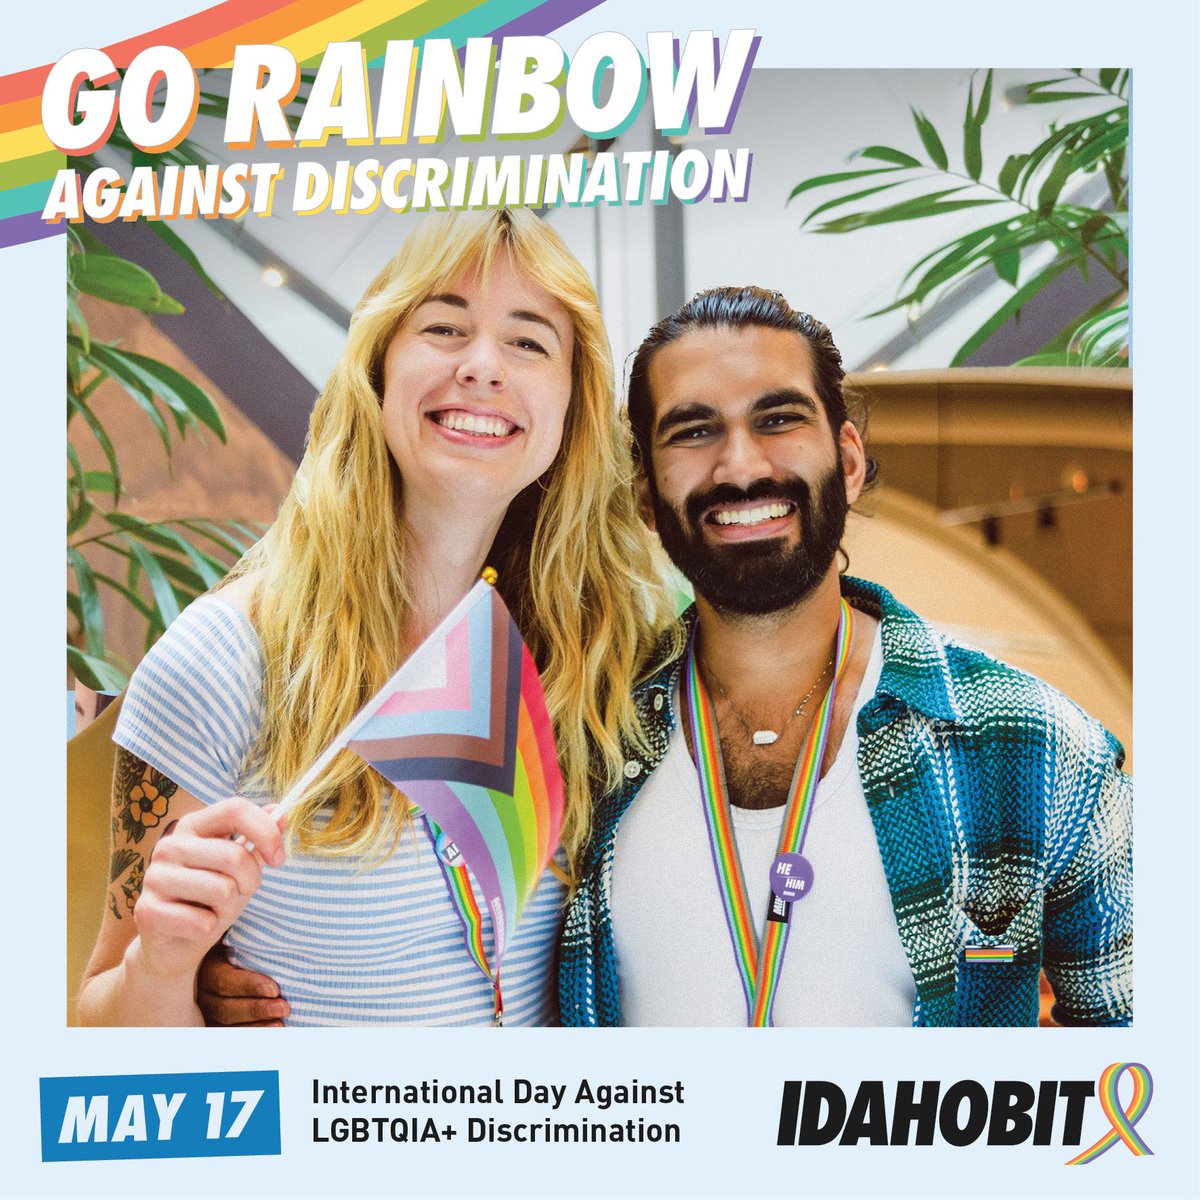 Today is International Day Against LGBTQIA+ Discrimination. W/ inclusion at the forefront of our values, we're pleased to take a stand for LGTBQIA+ inclusion on all fronts. buff.ly/2FTHXEG More on our Diversity, Equity and Inclusion Strategy: buff.ly/4bIU5b4